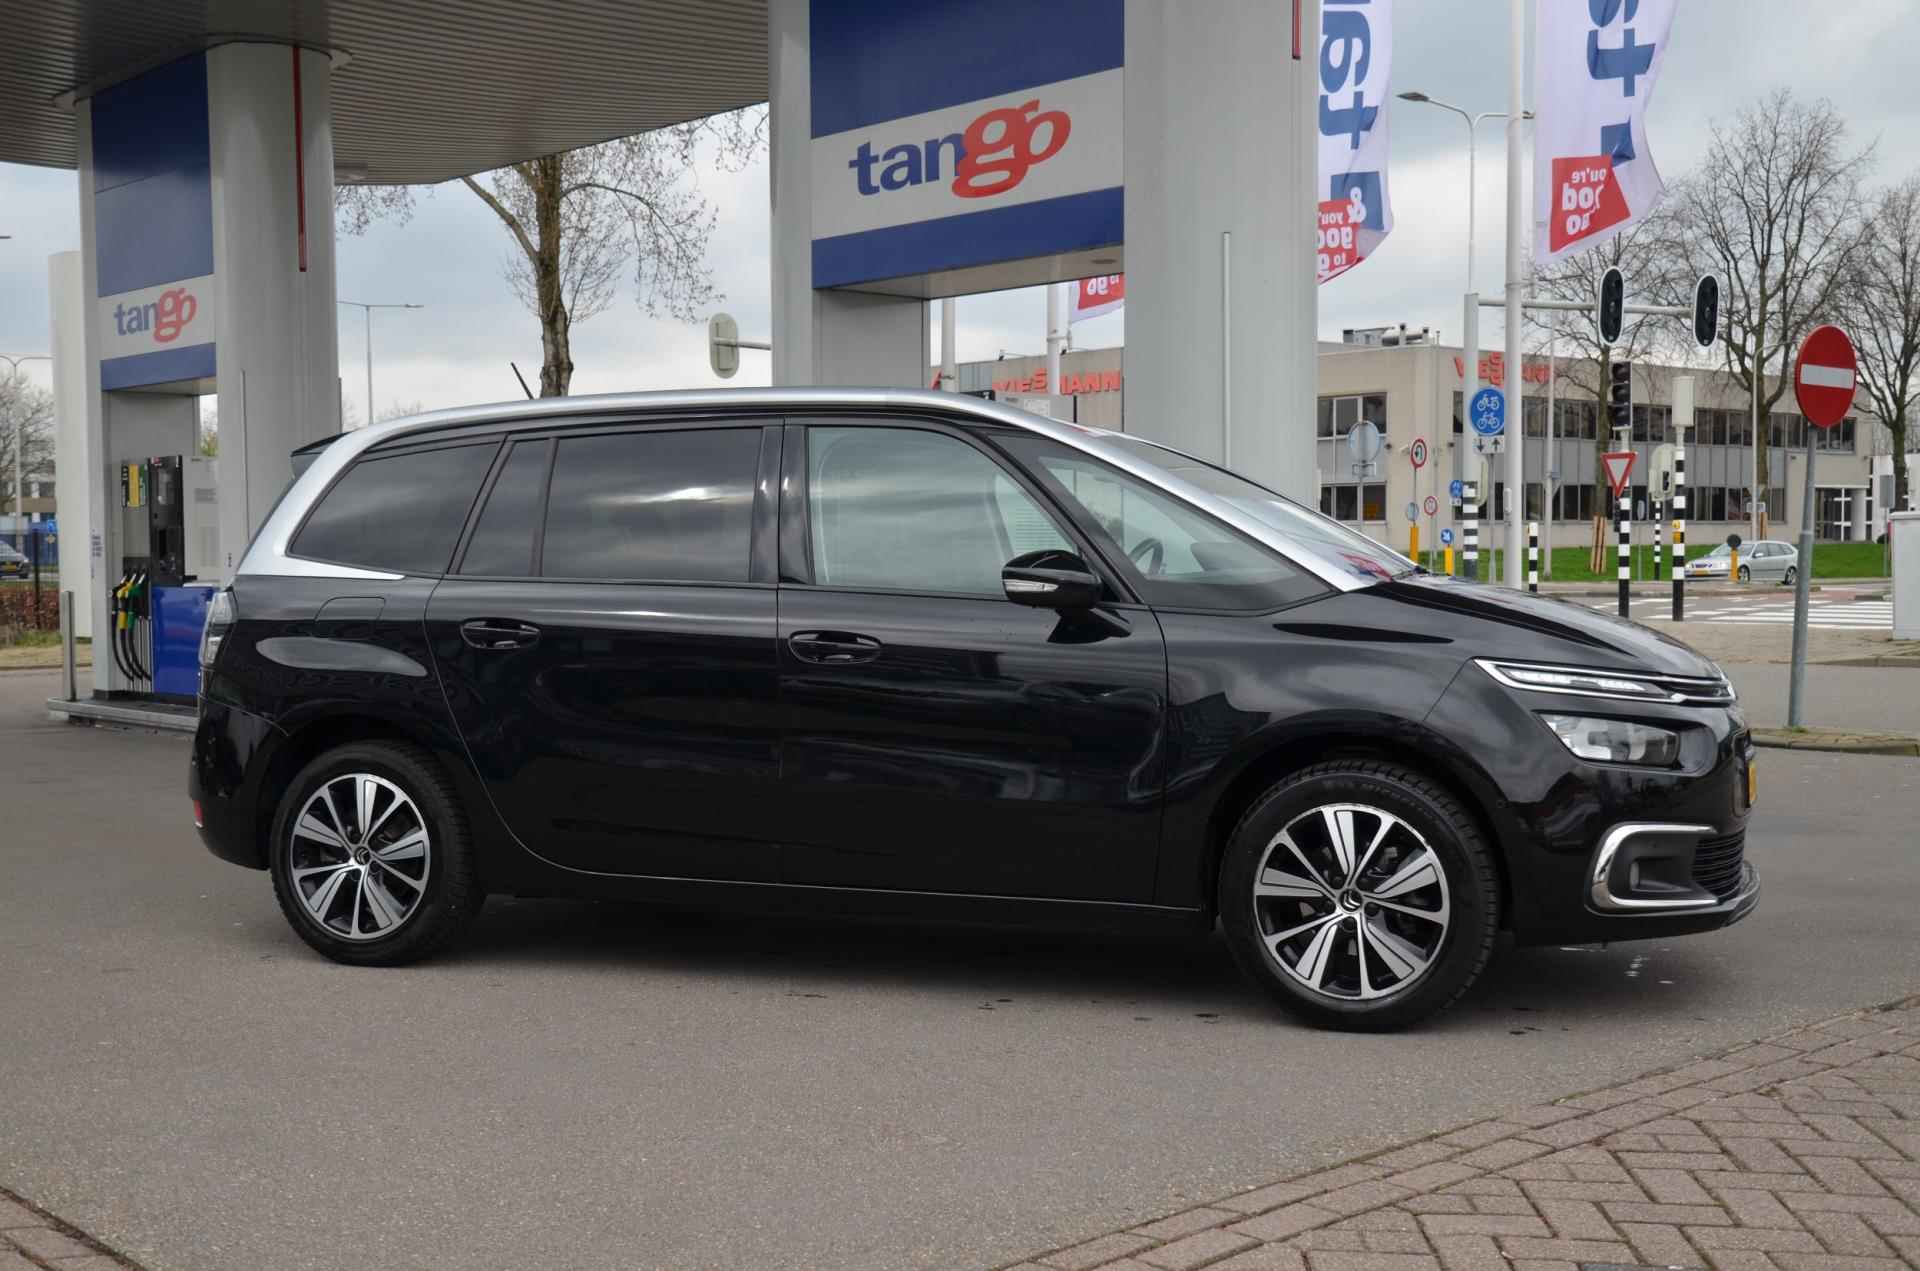 Citroen Grand C4 Picasso 1.2 7 PERS|7 PERSOONS|2E PAASDAG OPEN. - 5/30